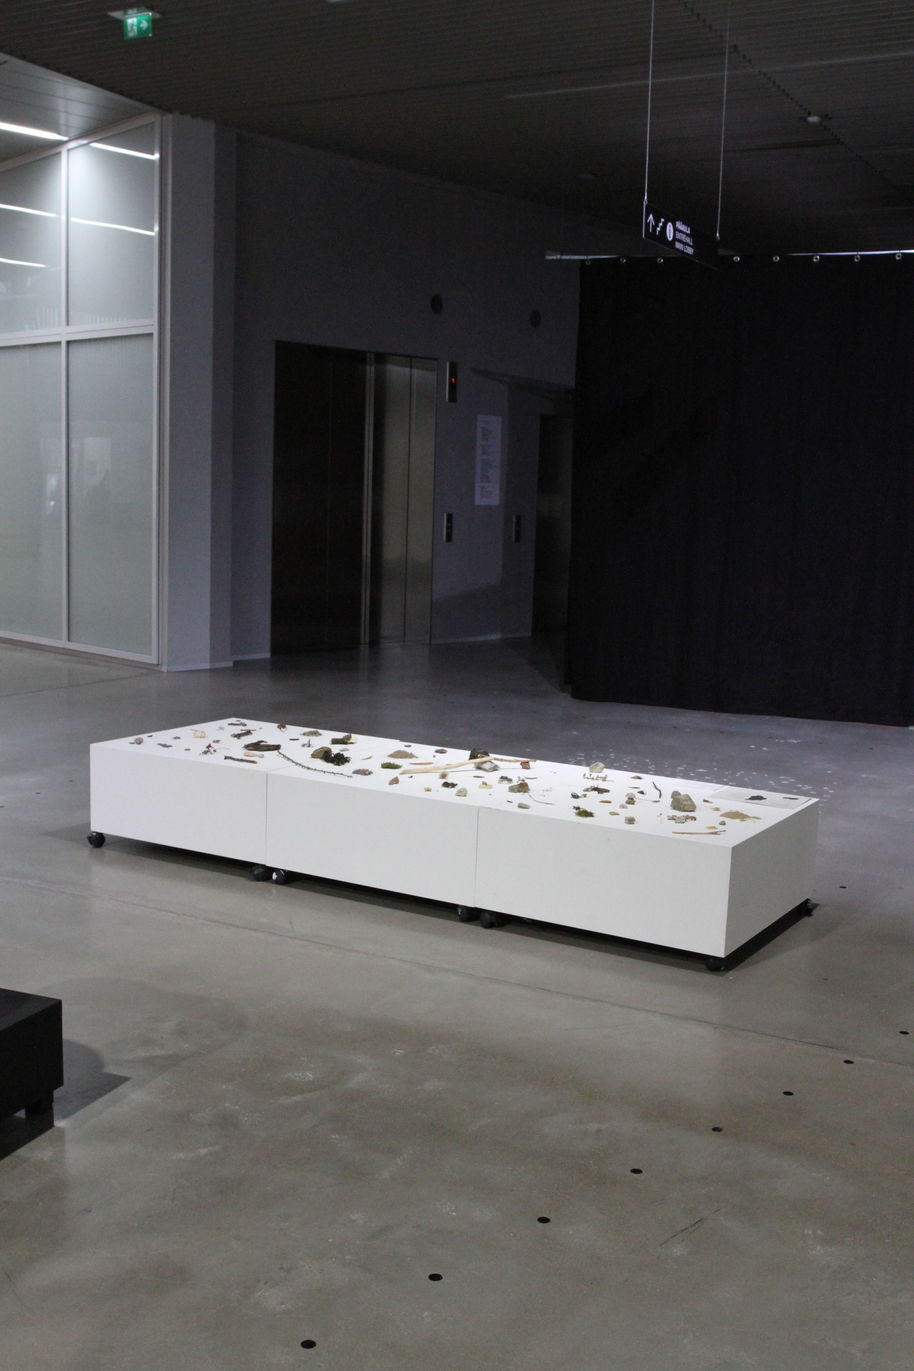 Image of an exhibition setup "Terra Cognita" where found pieces of nature are set as an installation on pedestals